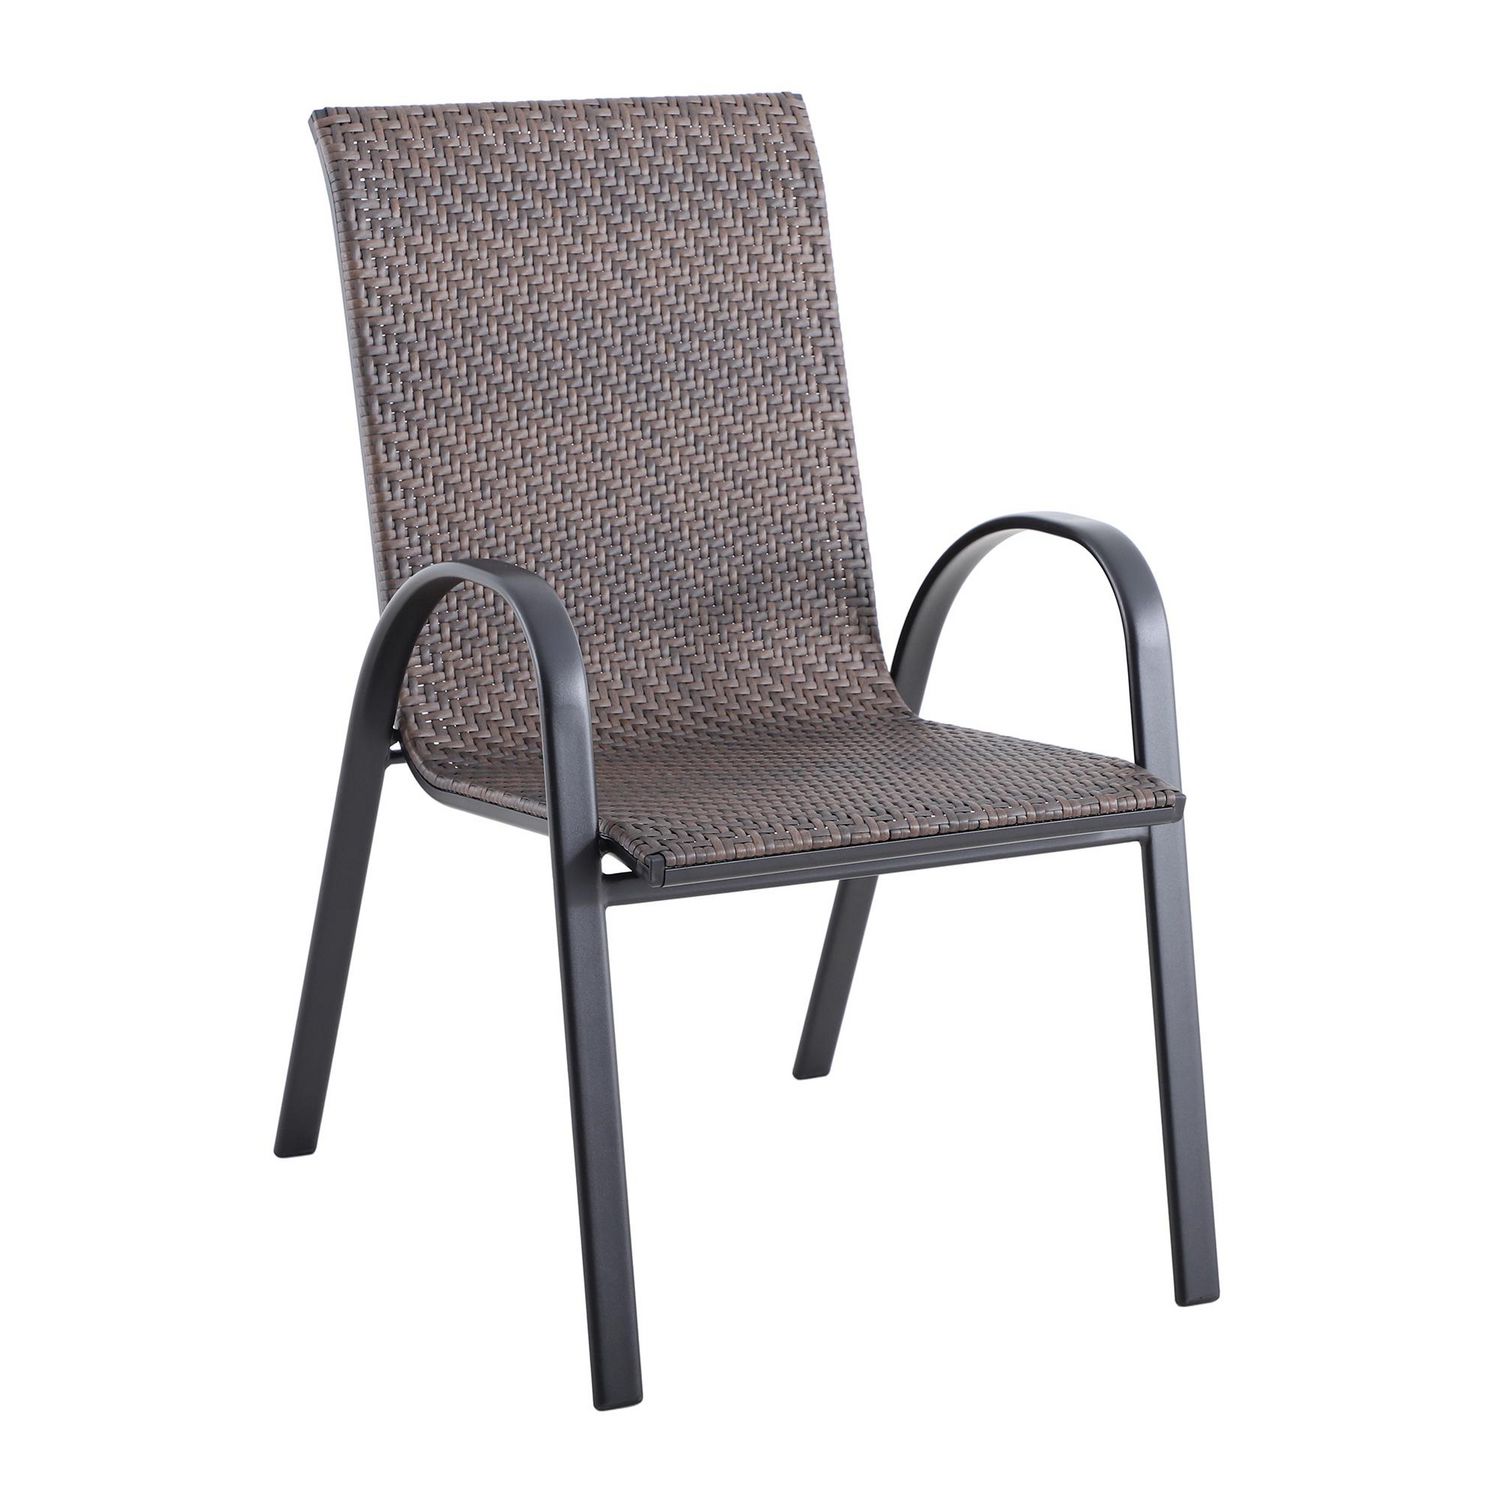 Mainstays River Oaks Stacking Chair Canada - Stackable Patio Dining Chairs Canada